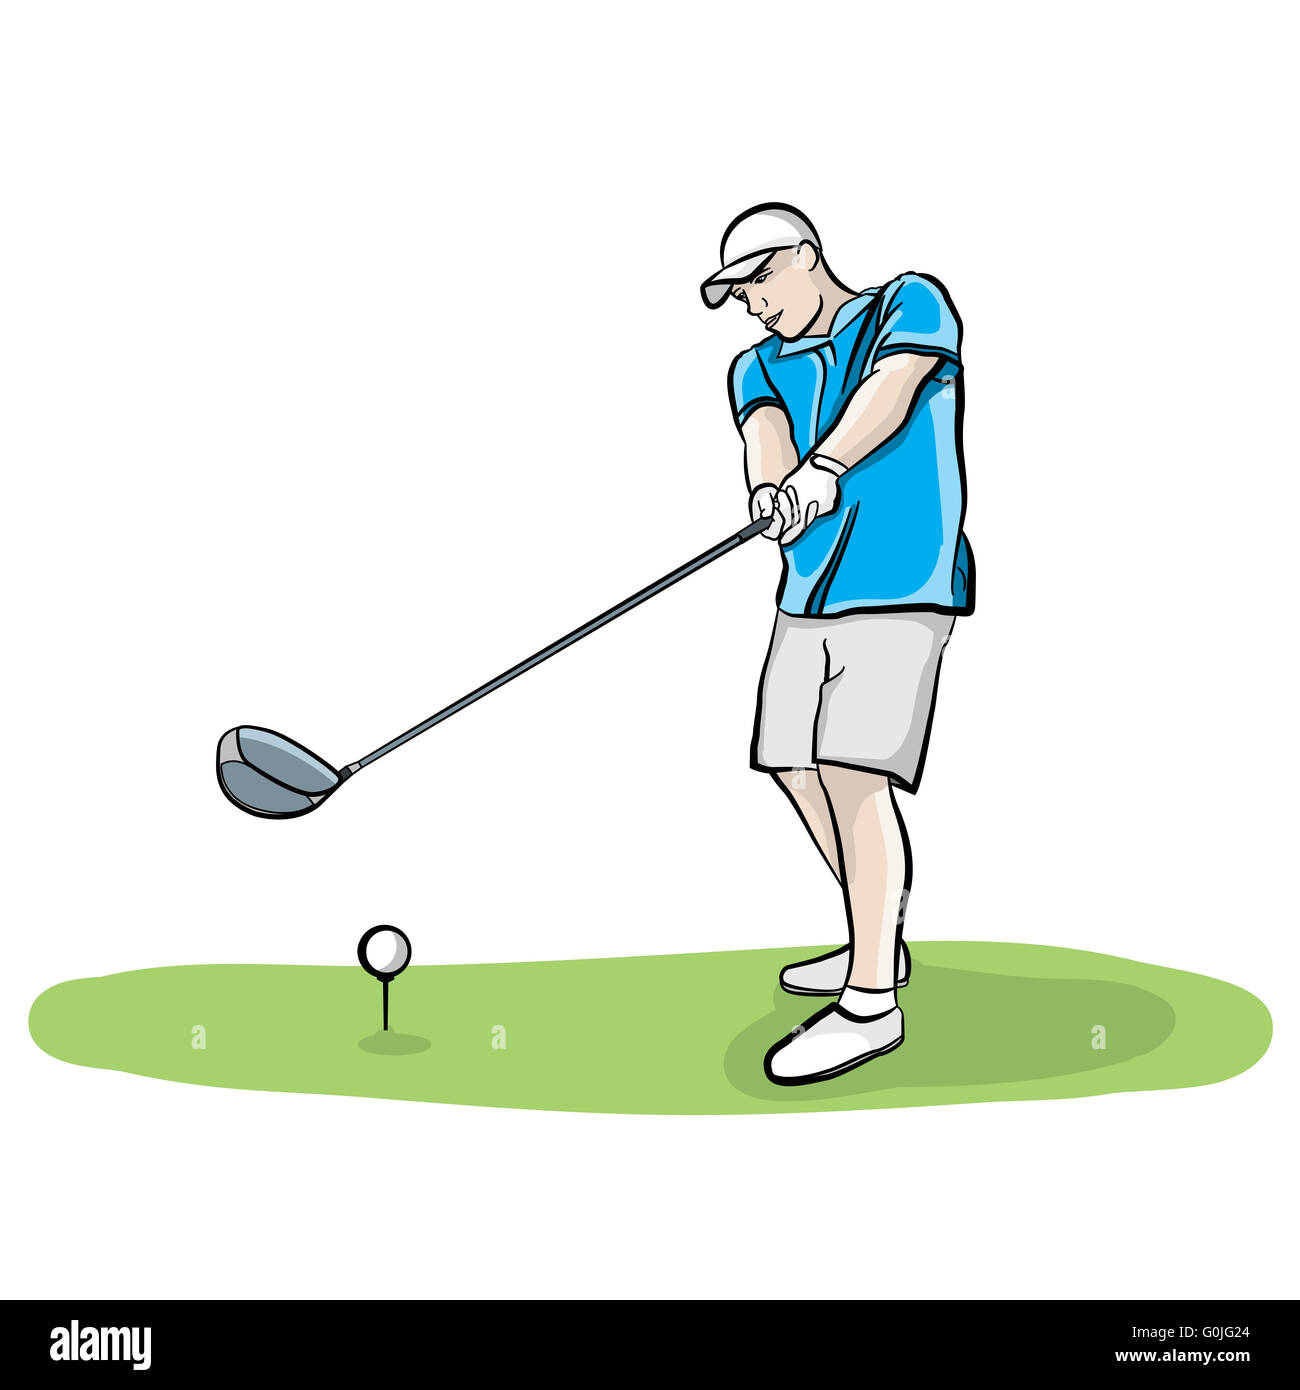 An illustration of a golfer on the tee box hitting a golf ball with a  driver club Stock Photo - Alamy